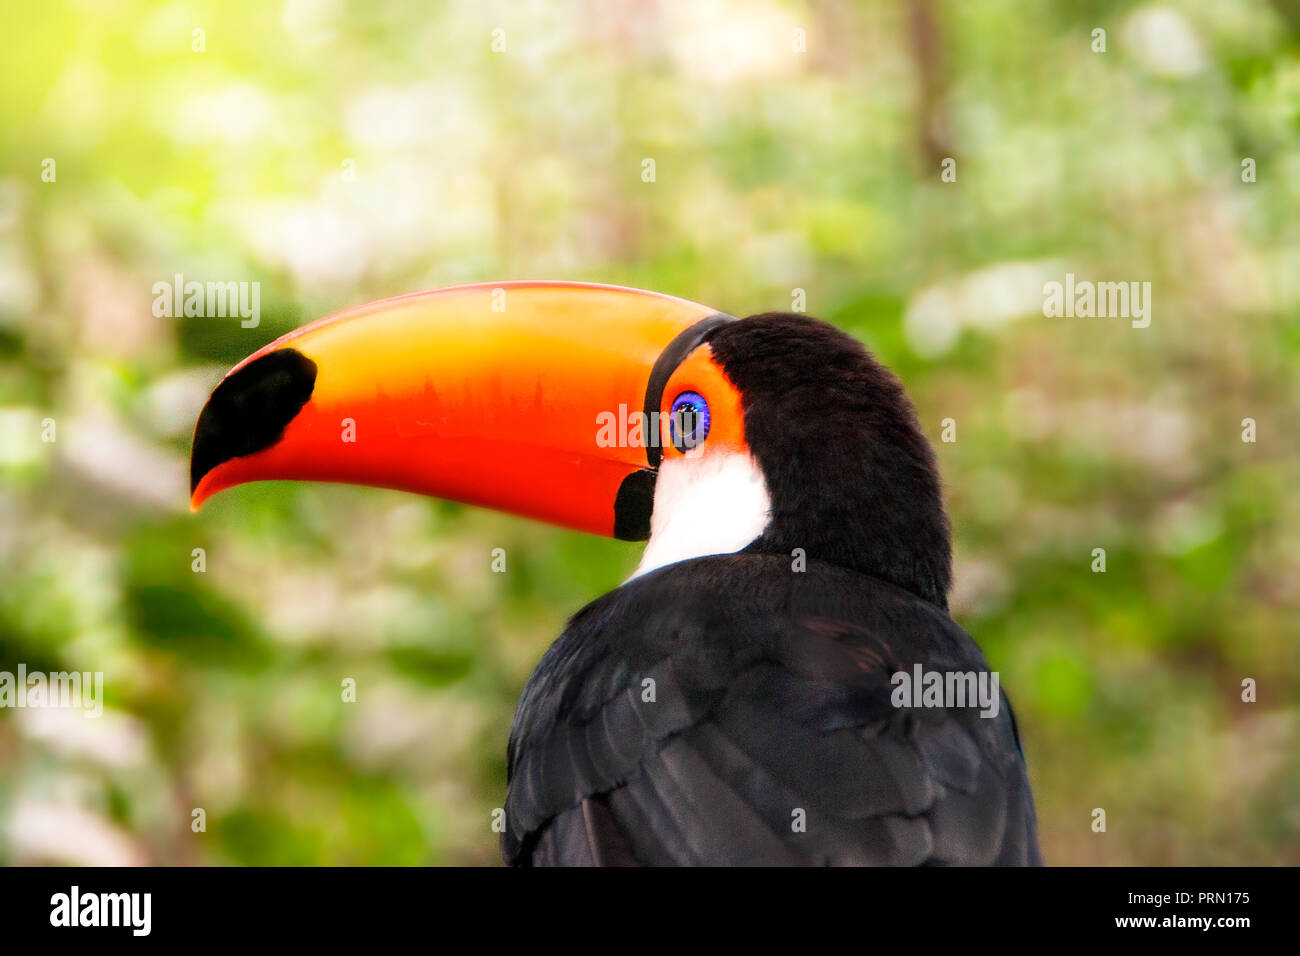 Portrait of Toucan Toco bird close up sitting back on a branch of tree in rainforest. Also known as the common toucan or toucan Stock Photo